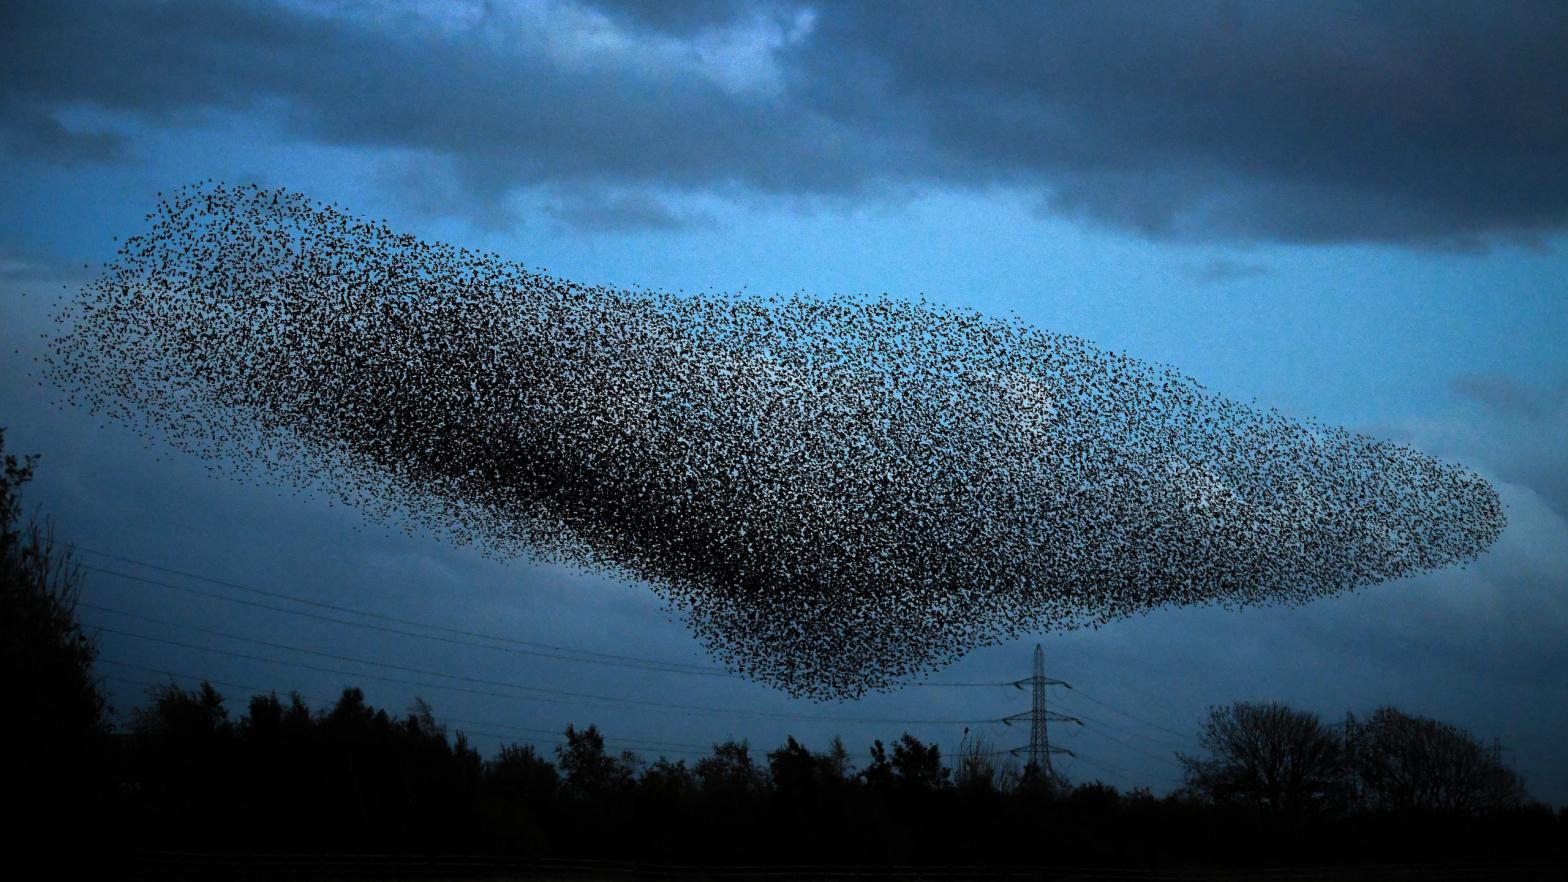 Starlings put on a display as they gather in murmurations on October 20, 2020 in Gretna, Scotland. (Photo: Jeff J Mitchel, Getty Images)